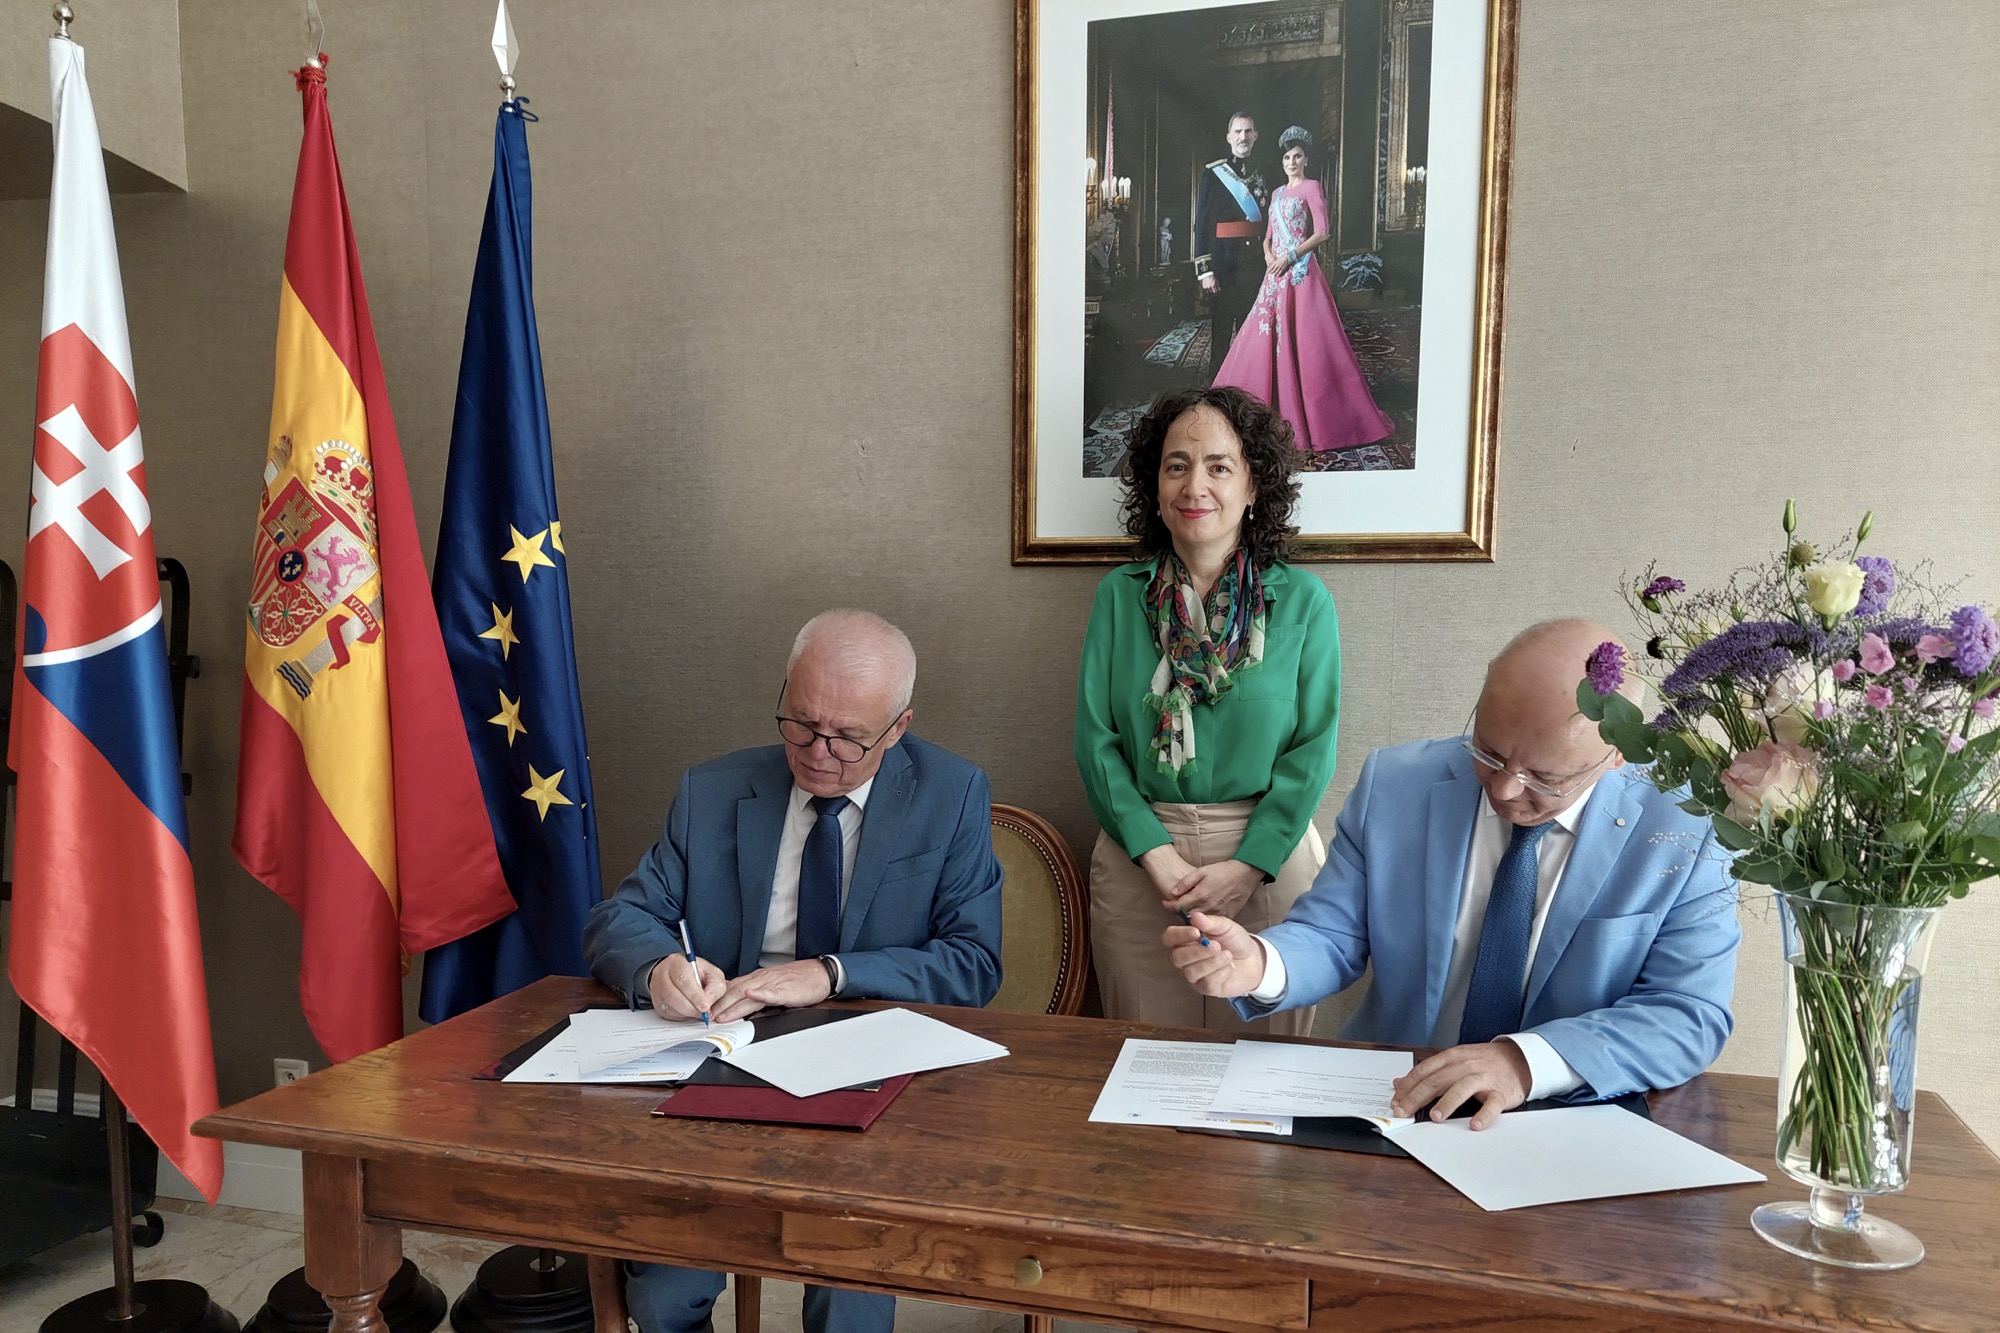 Signing of the Memorandum of Understanding between EUBA and ICEX Spain Trade and Investment